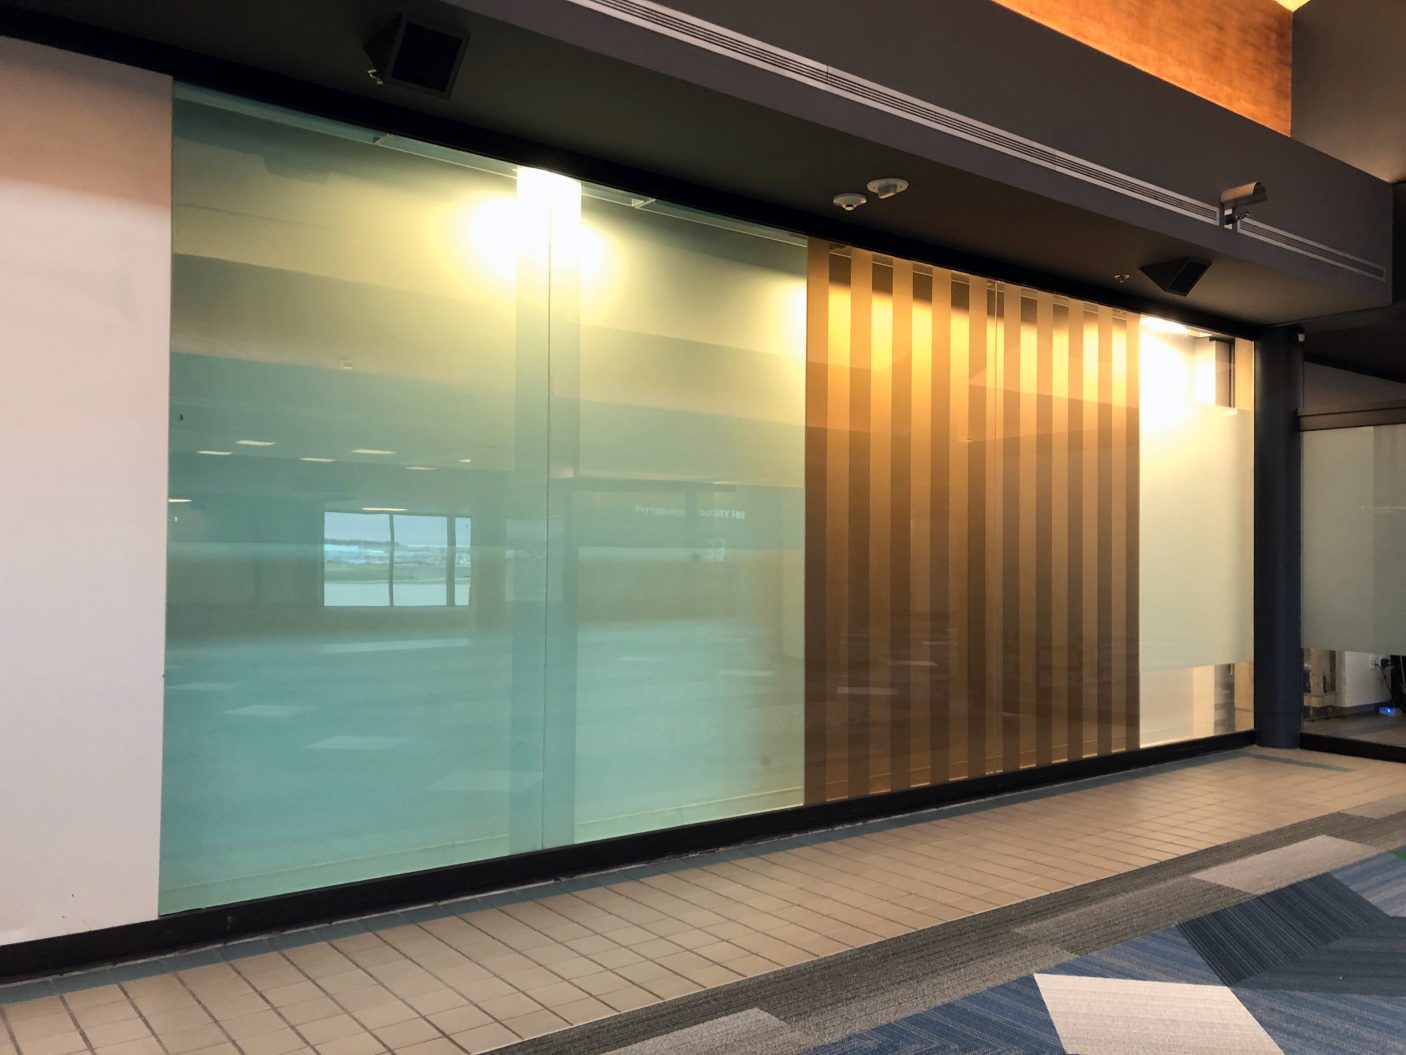 Commercial window film applied to glass for privacy